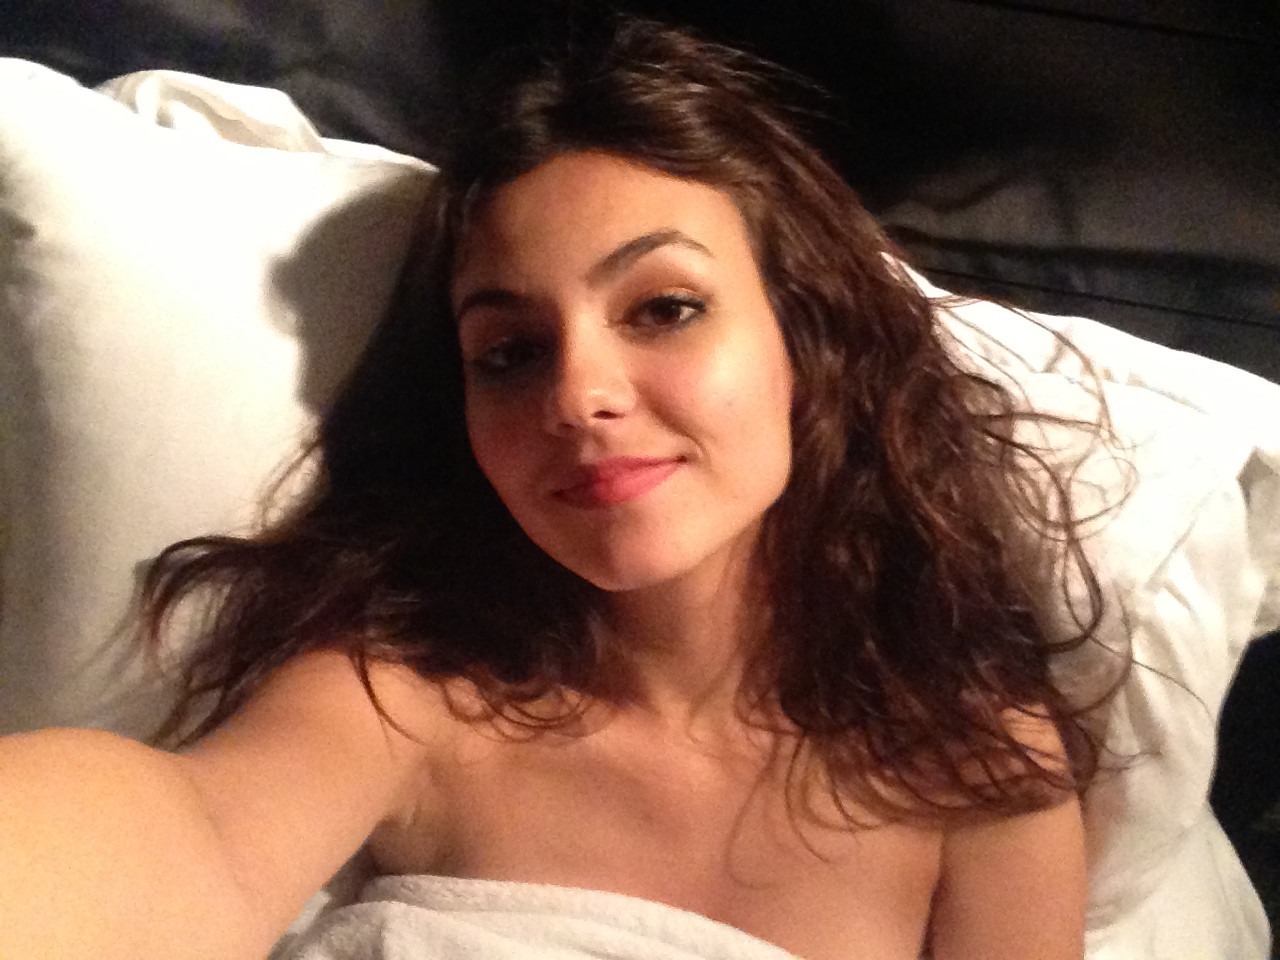  Victoria Justice Naked Celeb 1409513214131 